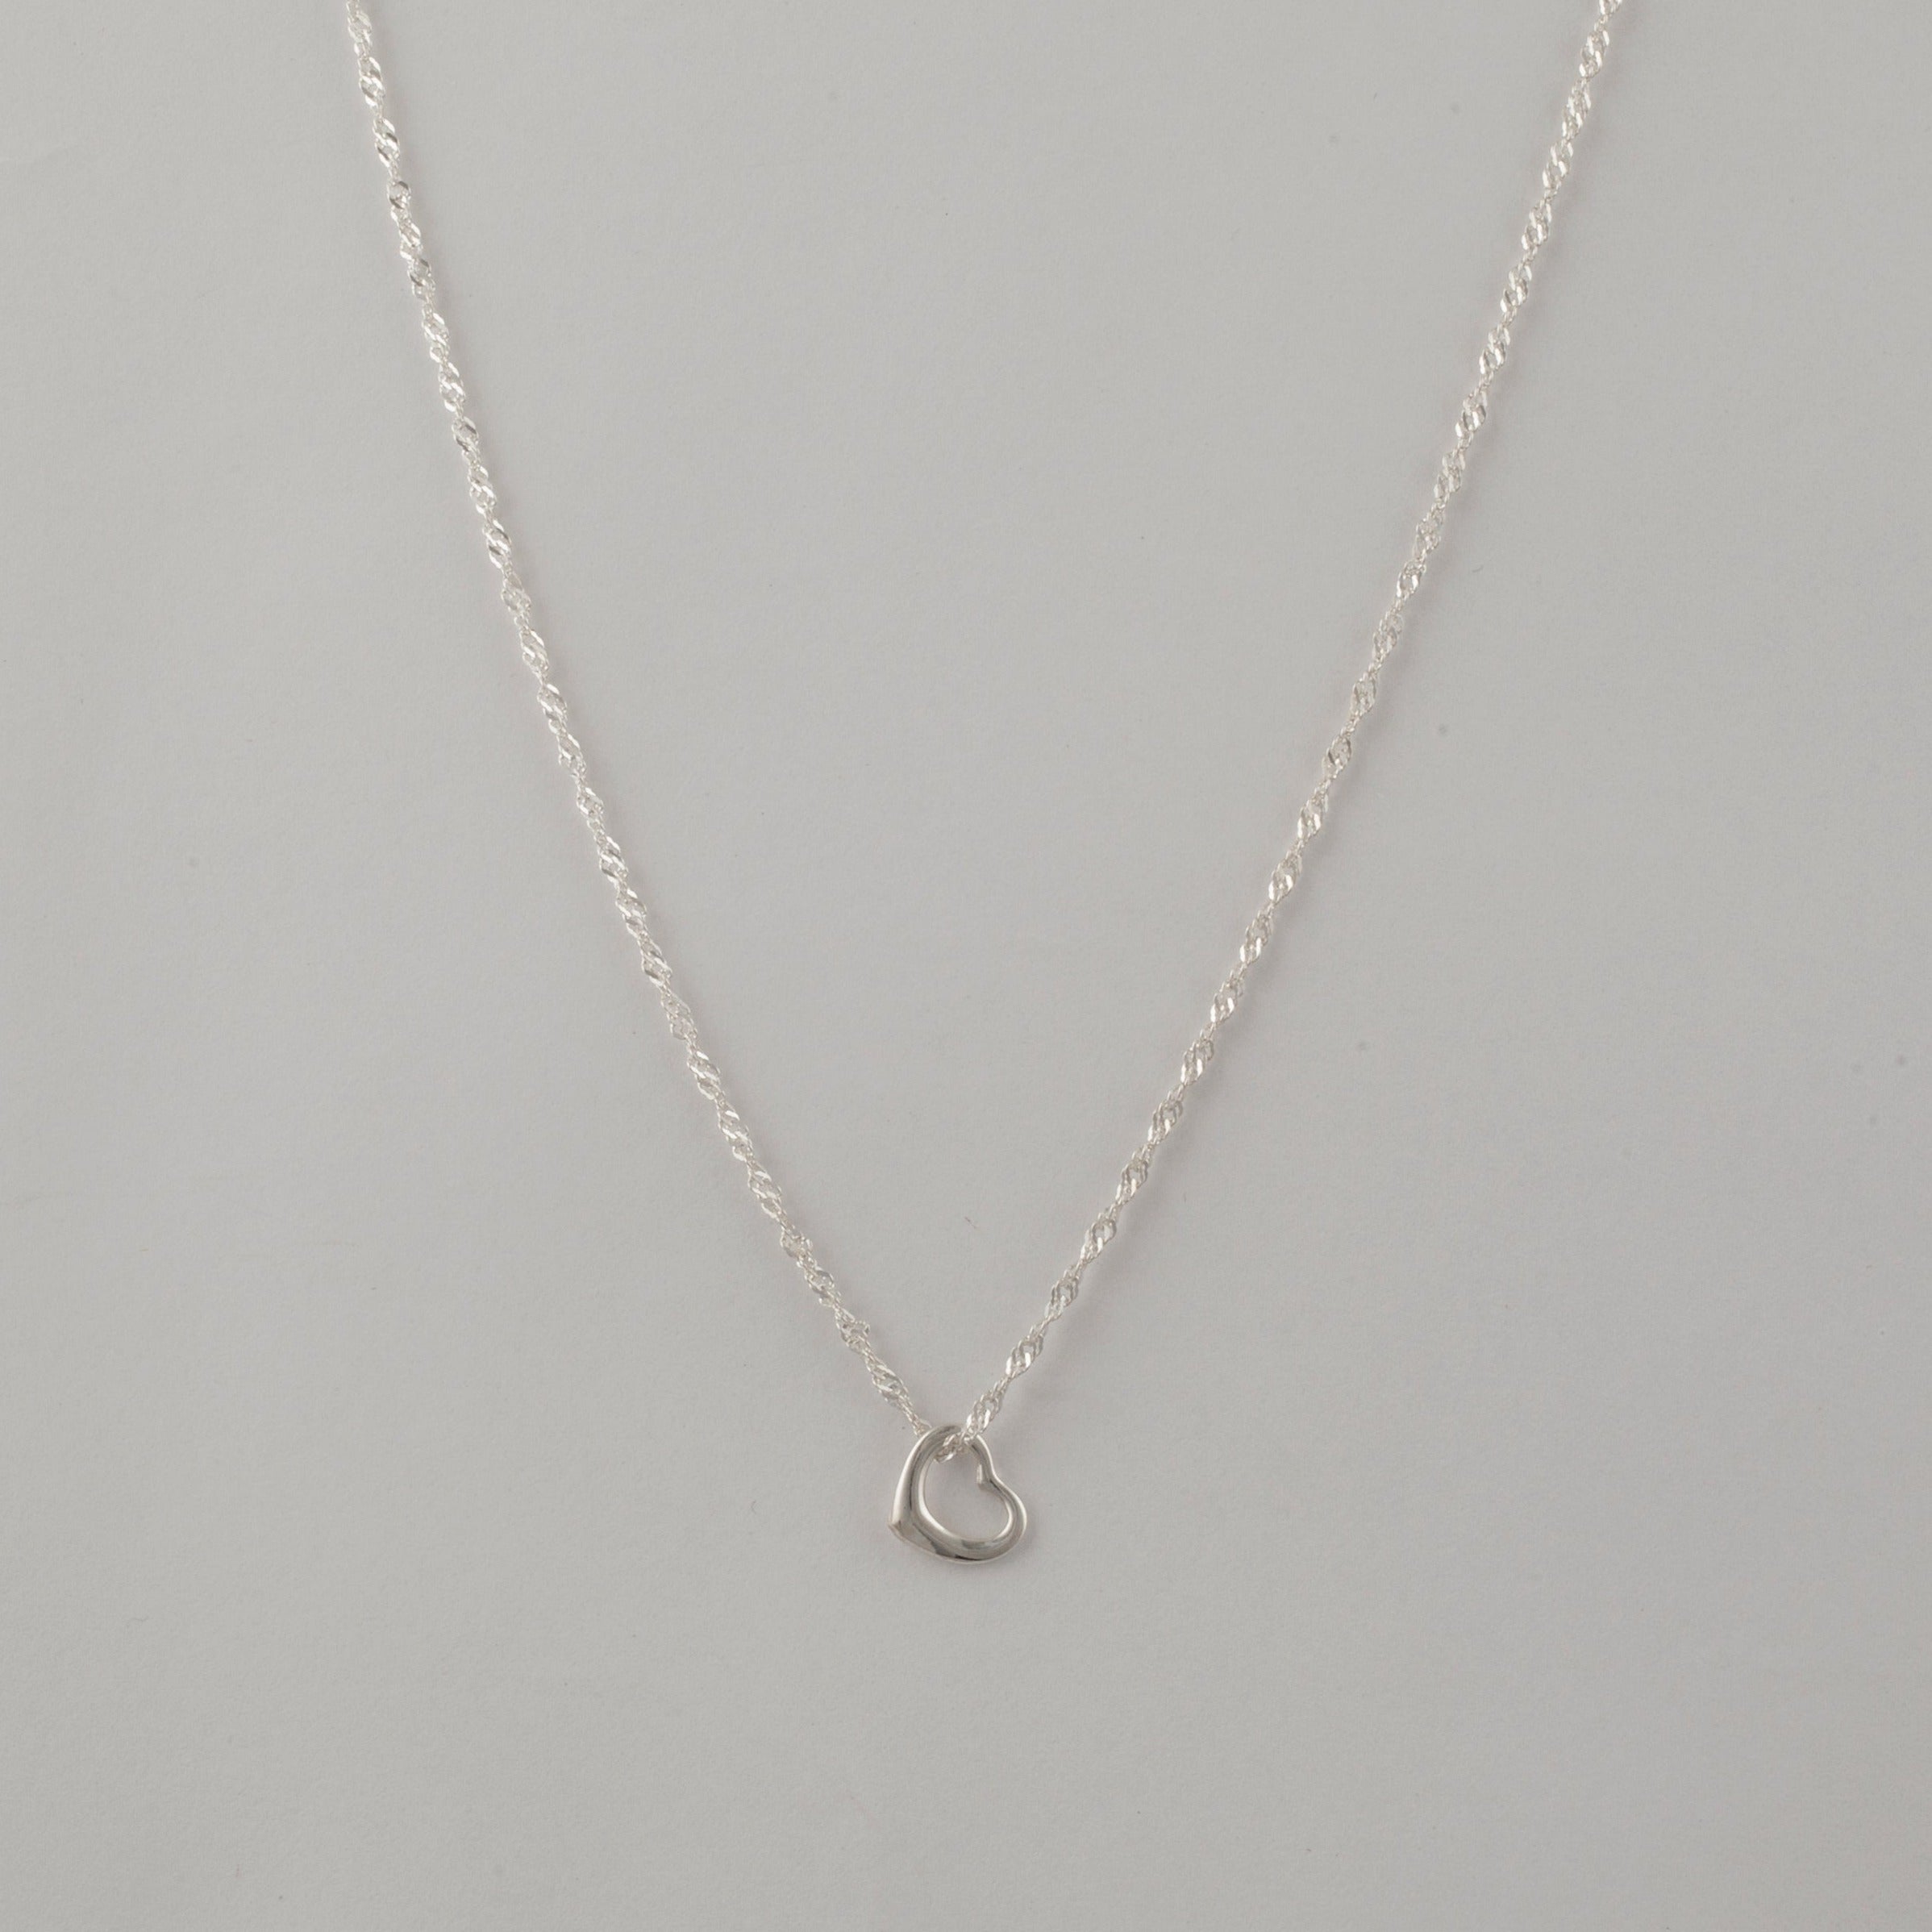 silver Hollow Heart Shaped Necklace on a Singapore Chain